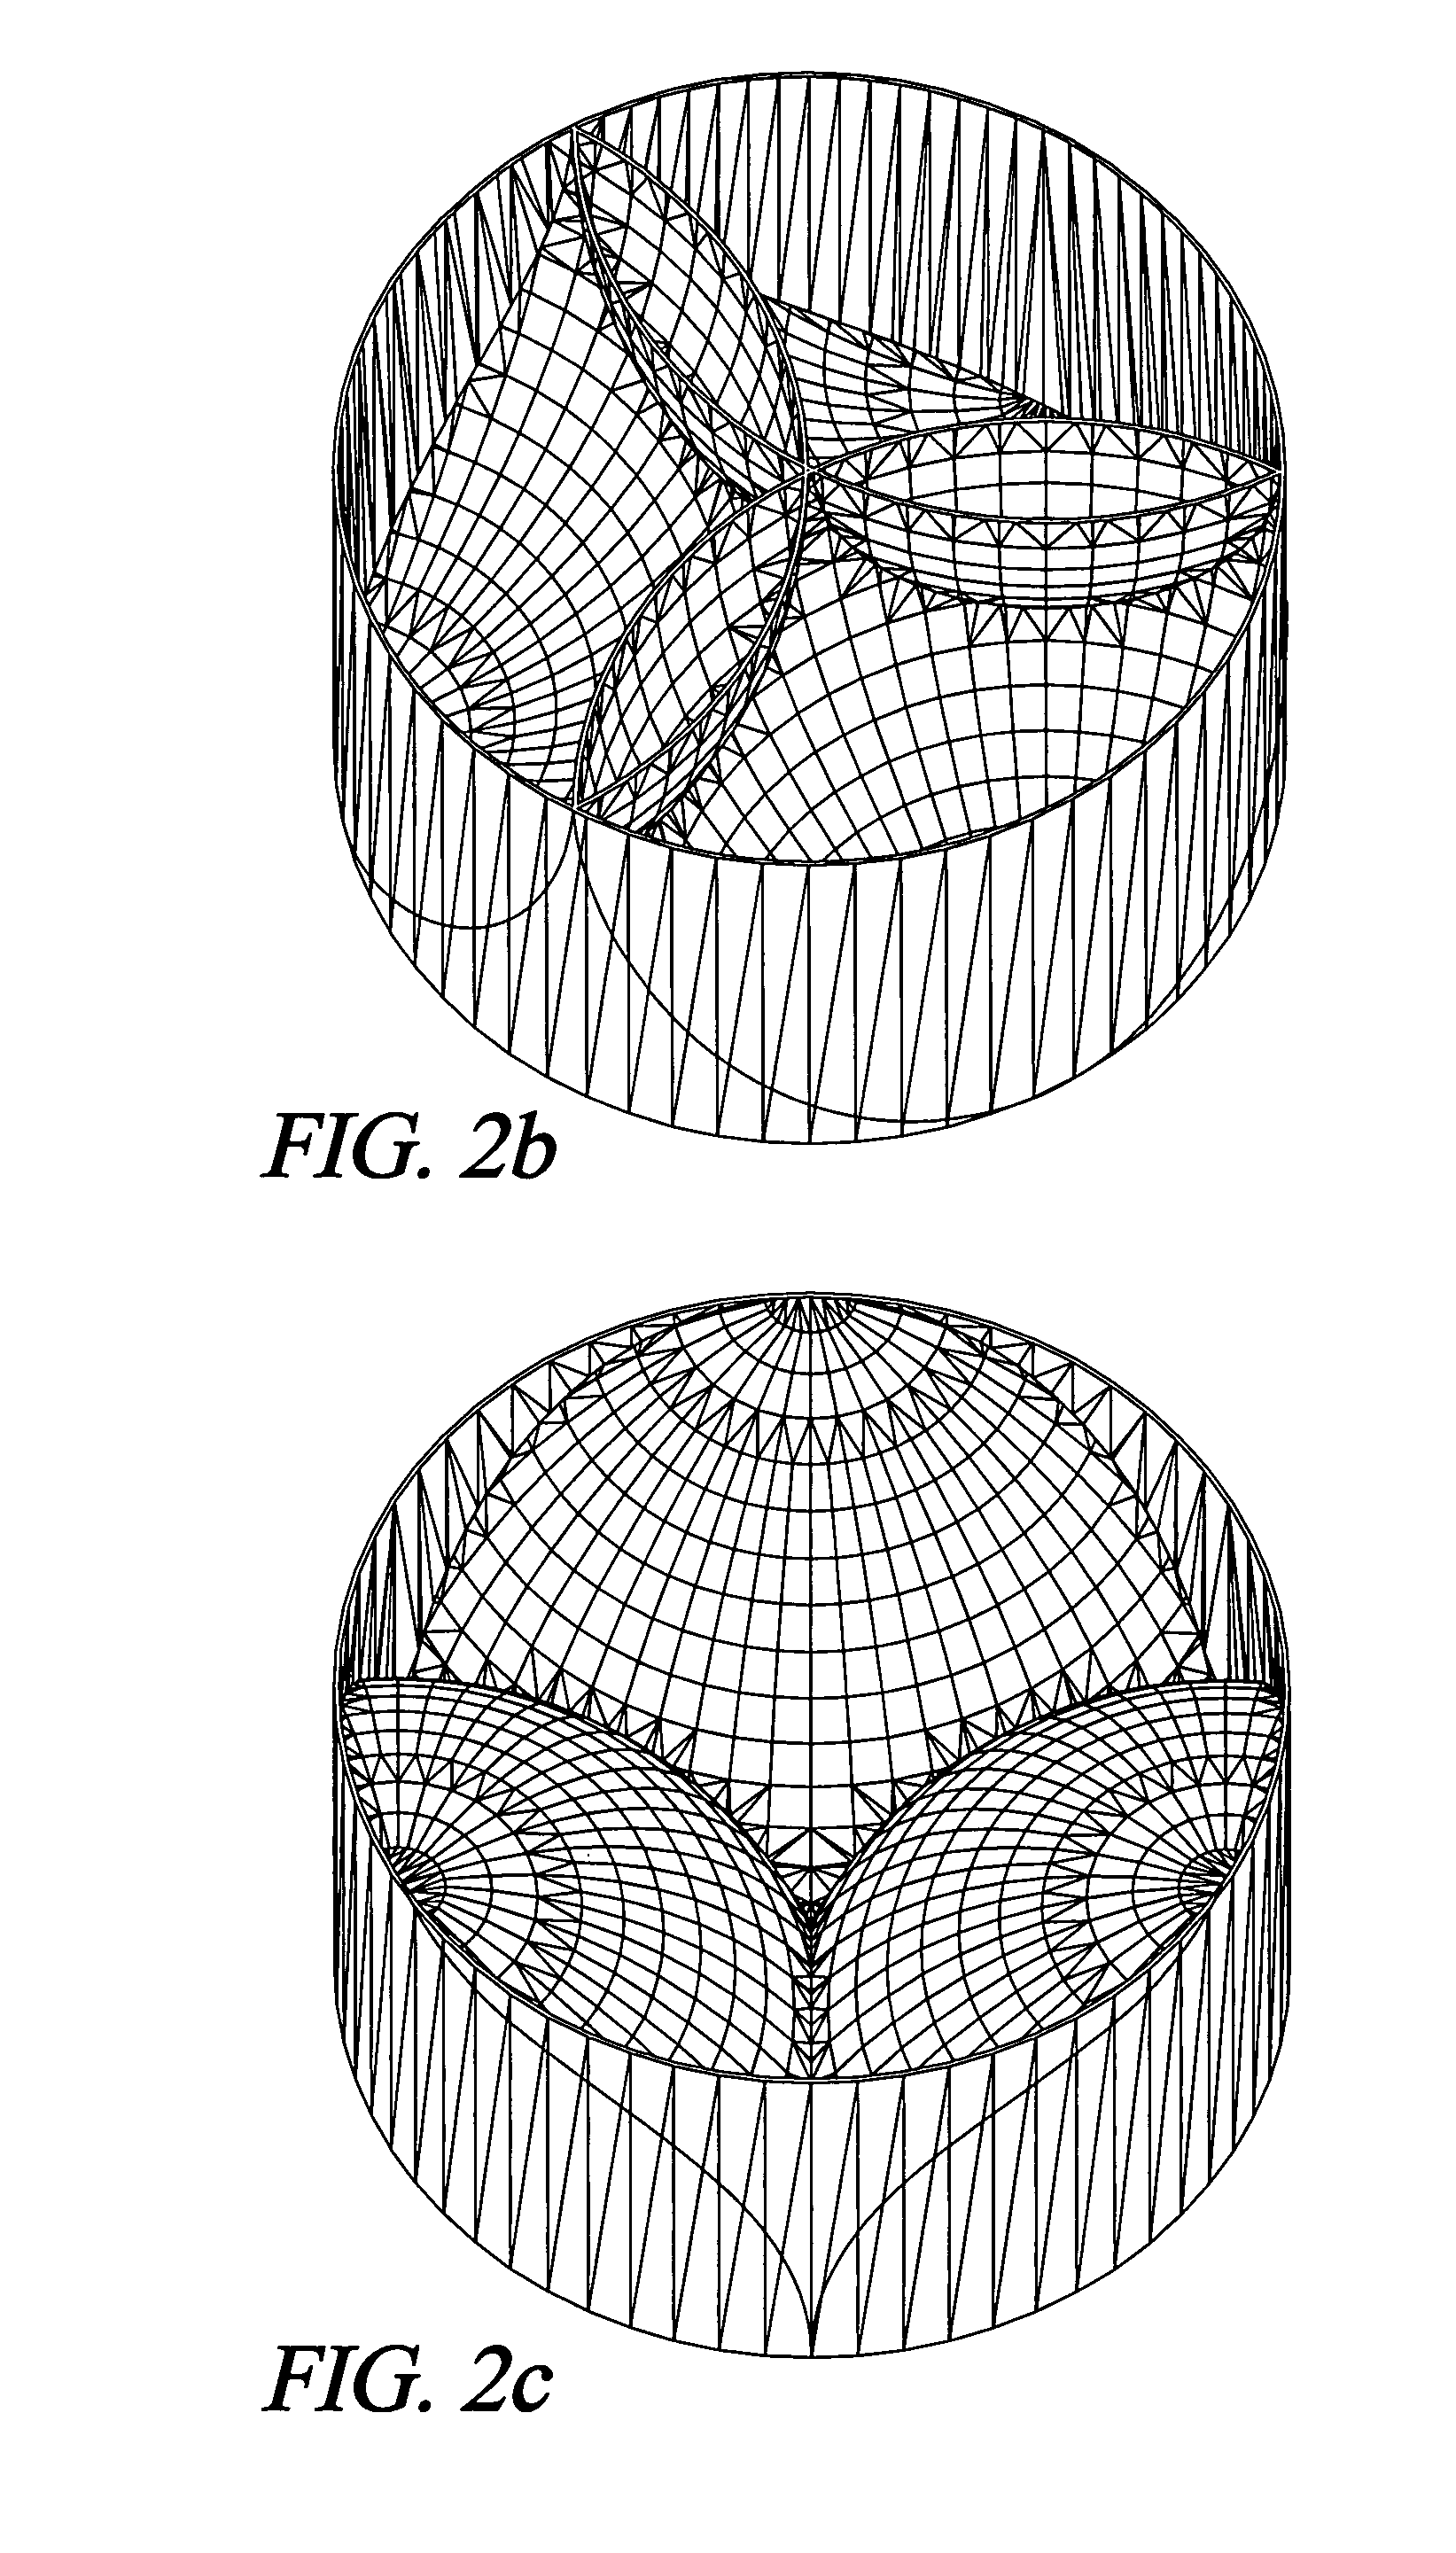 Intra-annular mounting frame for aortic valve repair